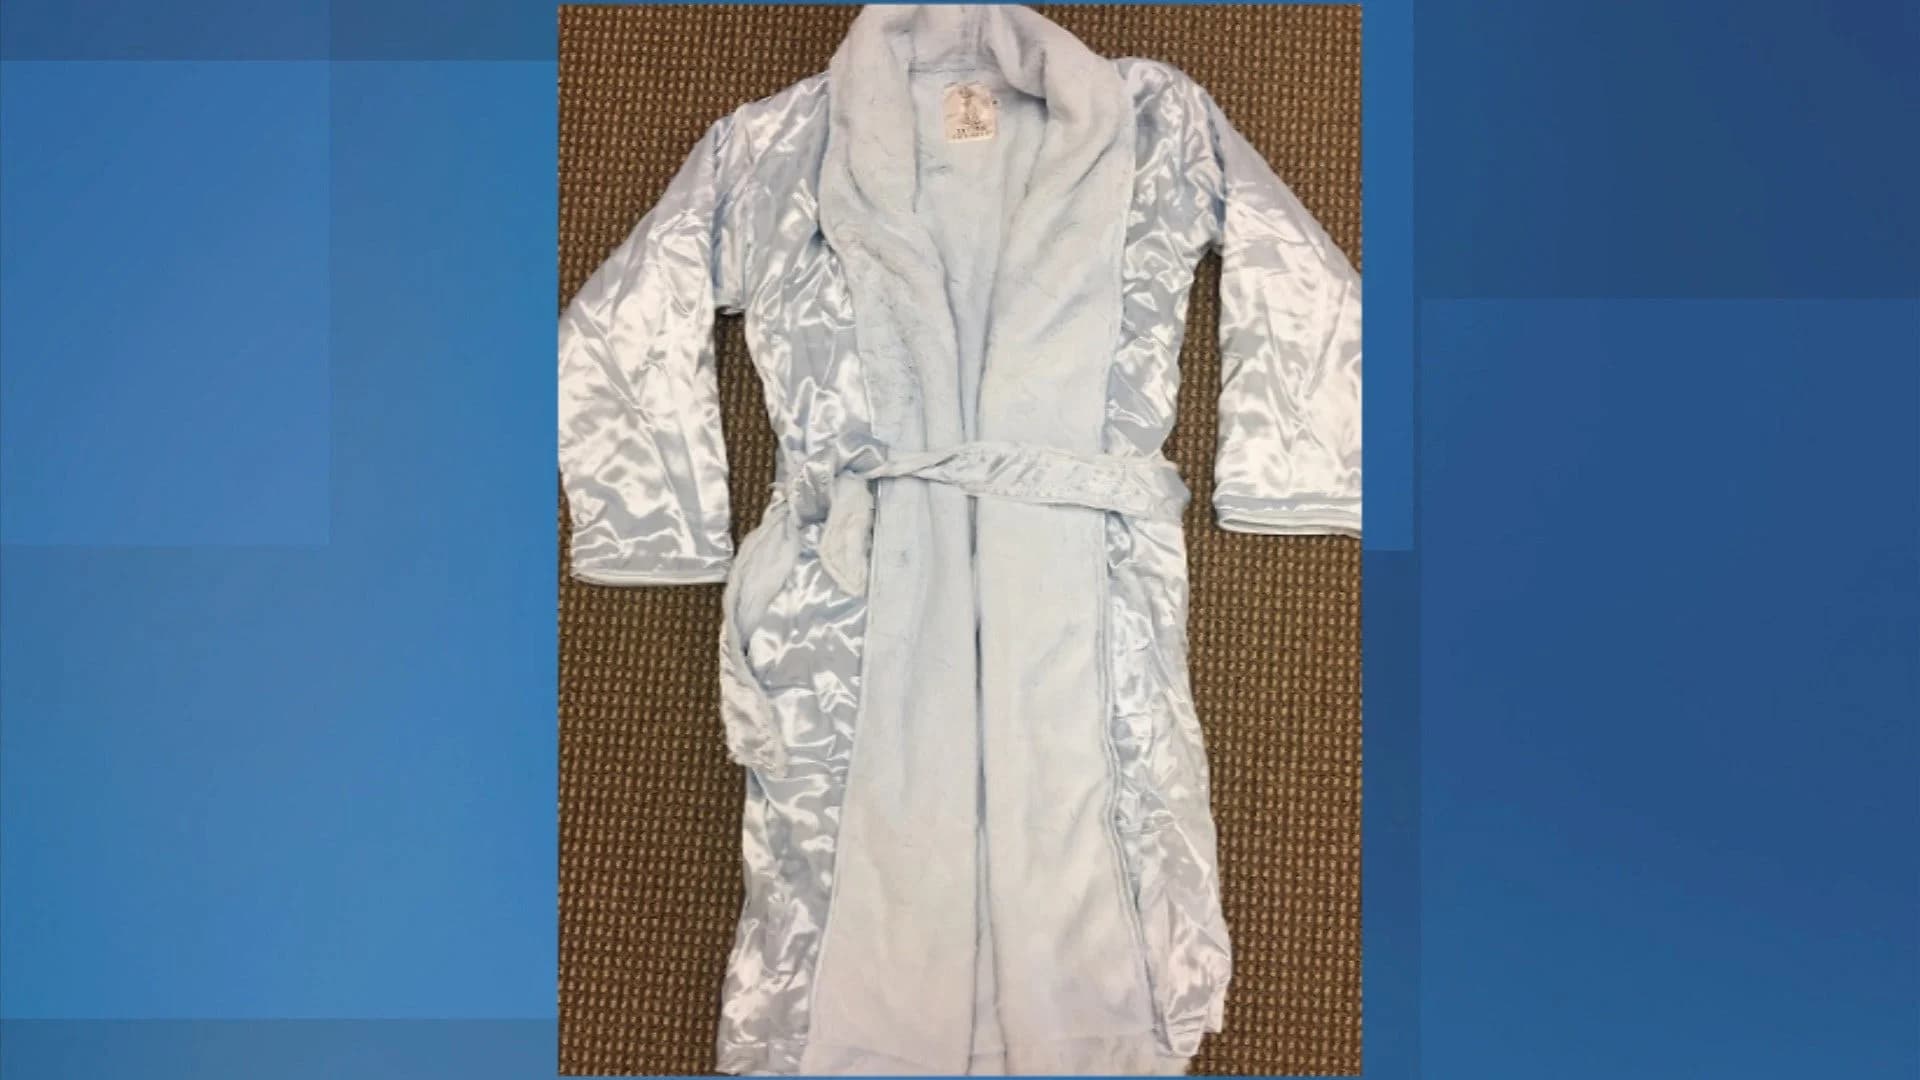 Children’s robes recalled for flammability concerns